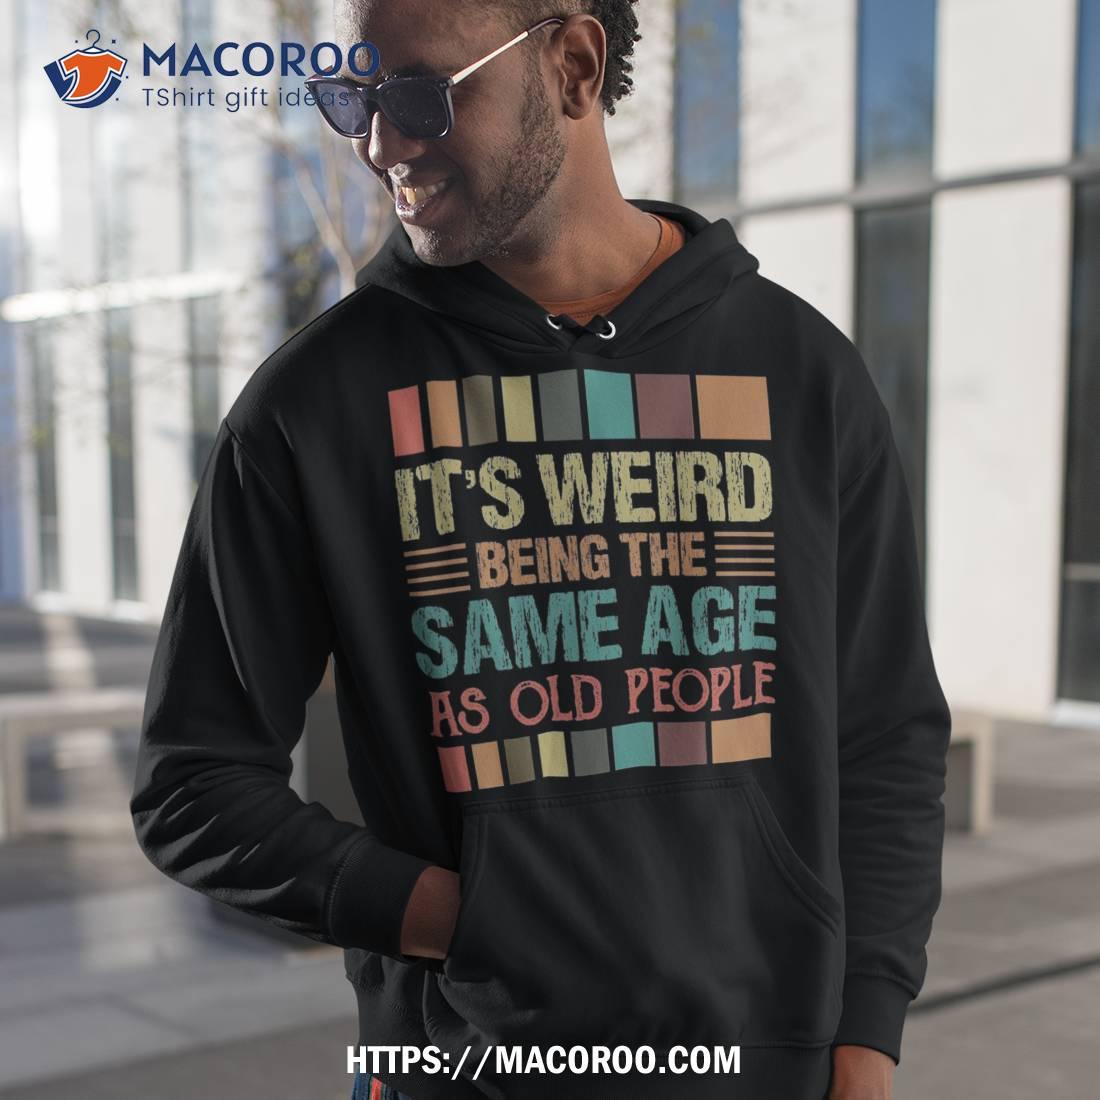 https://images.macoroo.com/wp-content/uploads/2023/08/it-s-weird-being-the-same-age-as-old-people-funny-retro-shirt-first-time-dad-gifts-hoodie-1.jpg